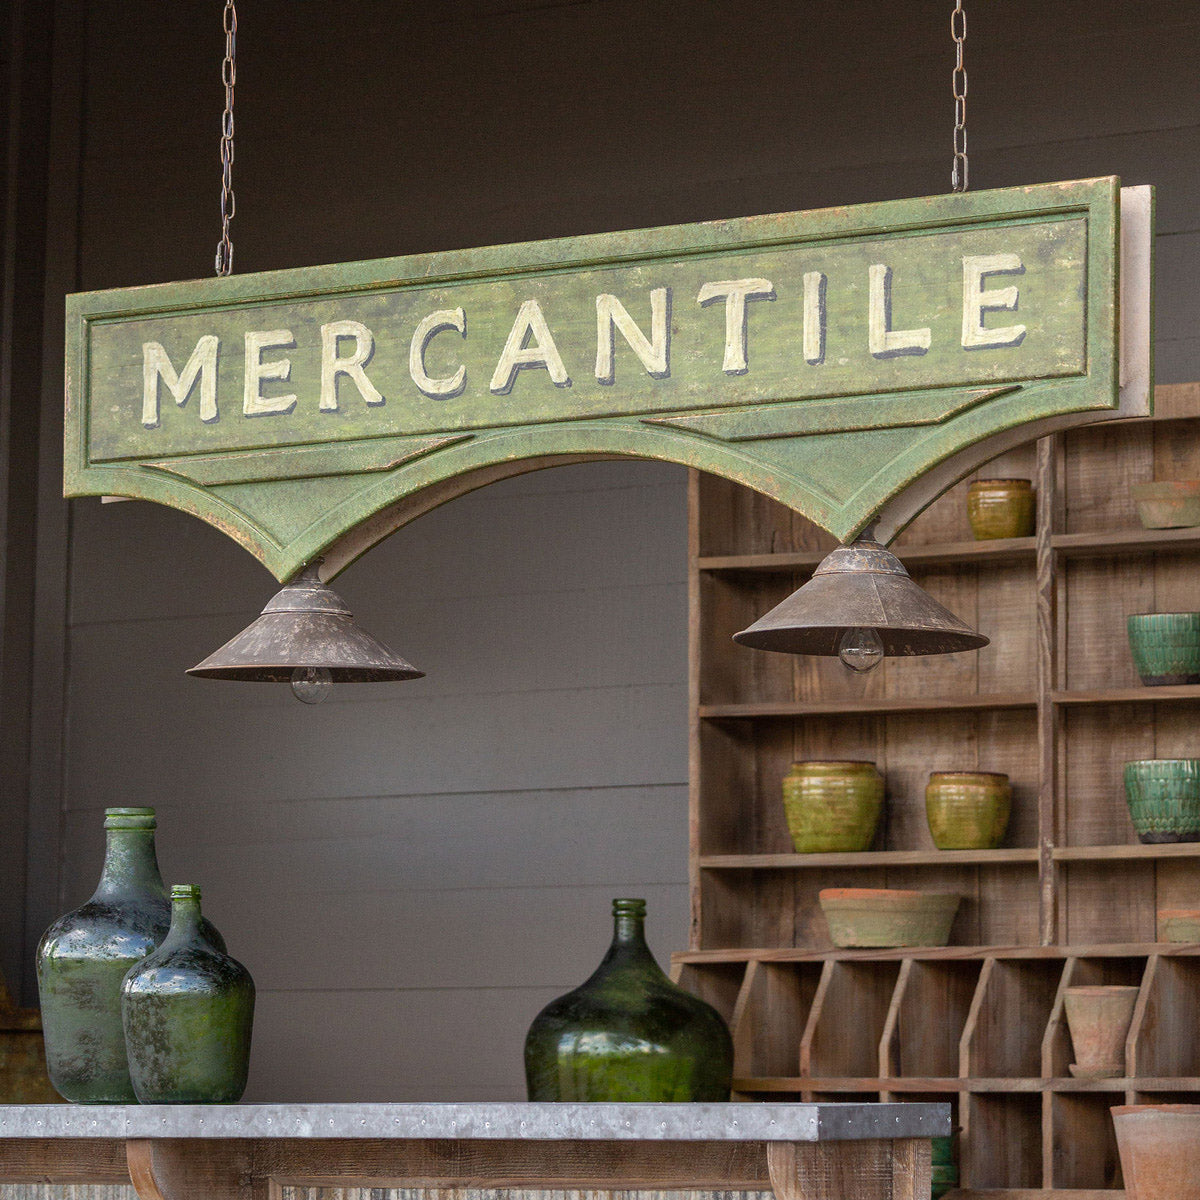 Mercantile Light Fixture- More Coming Soon!